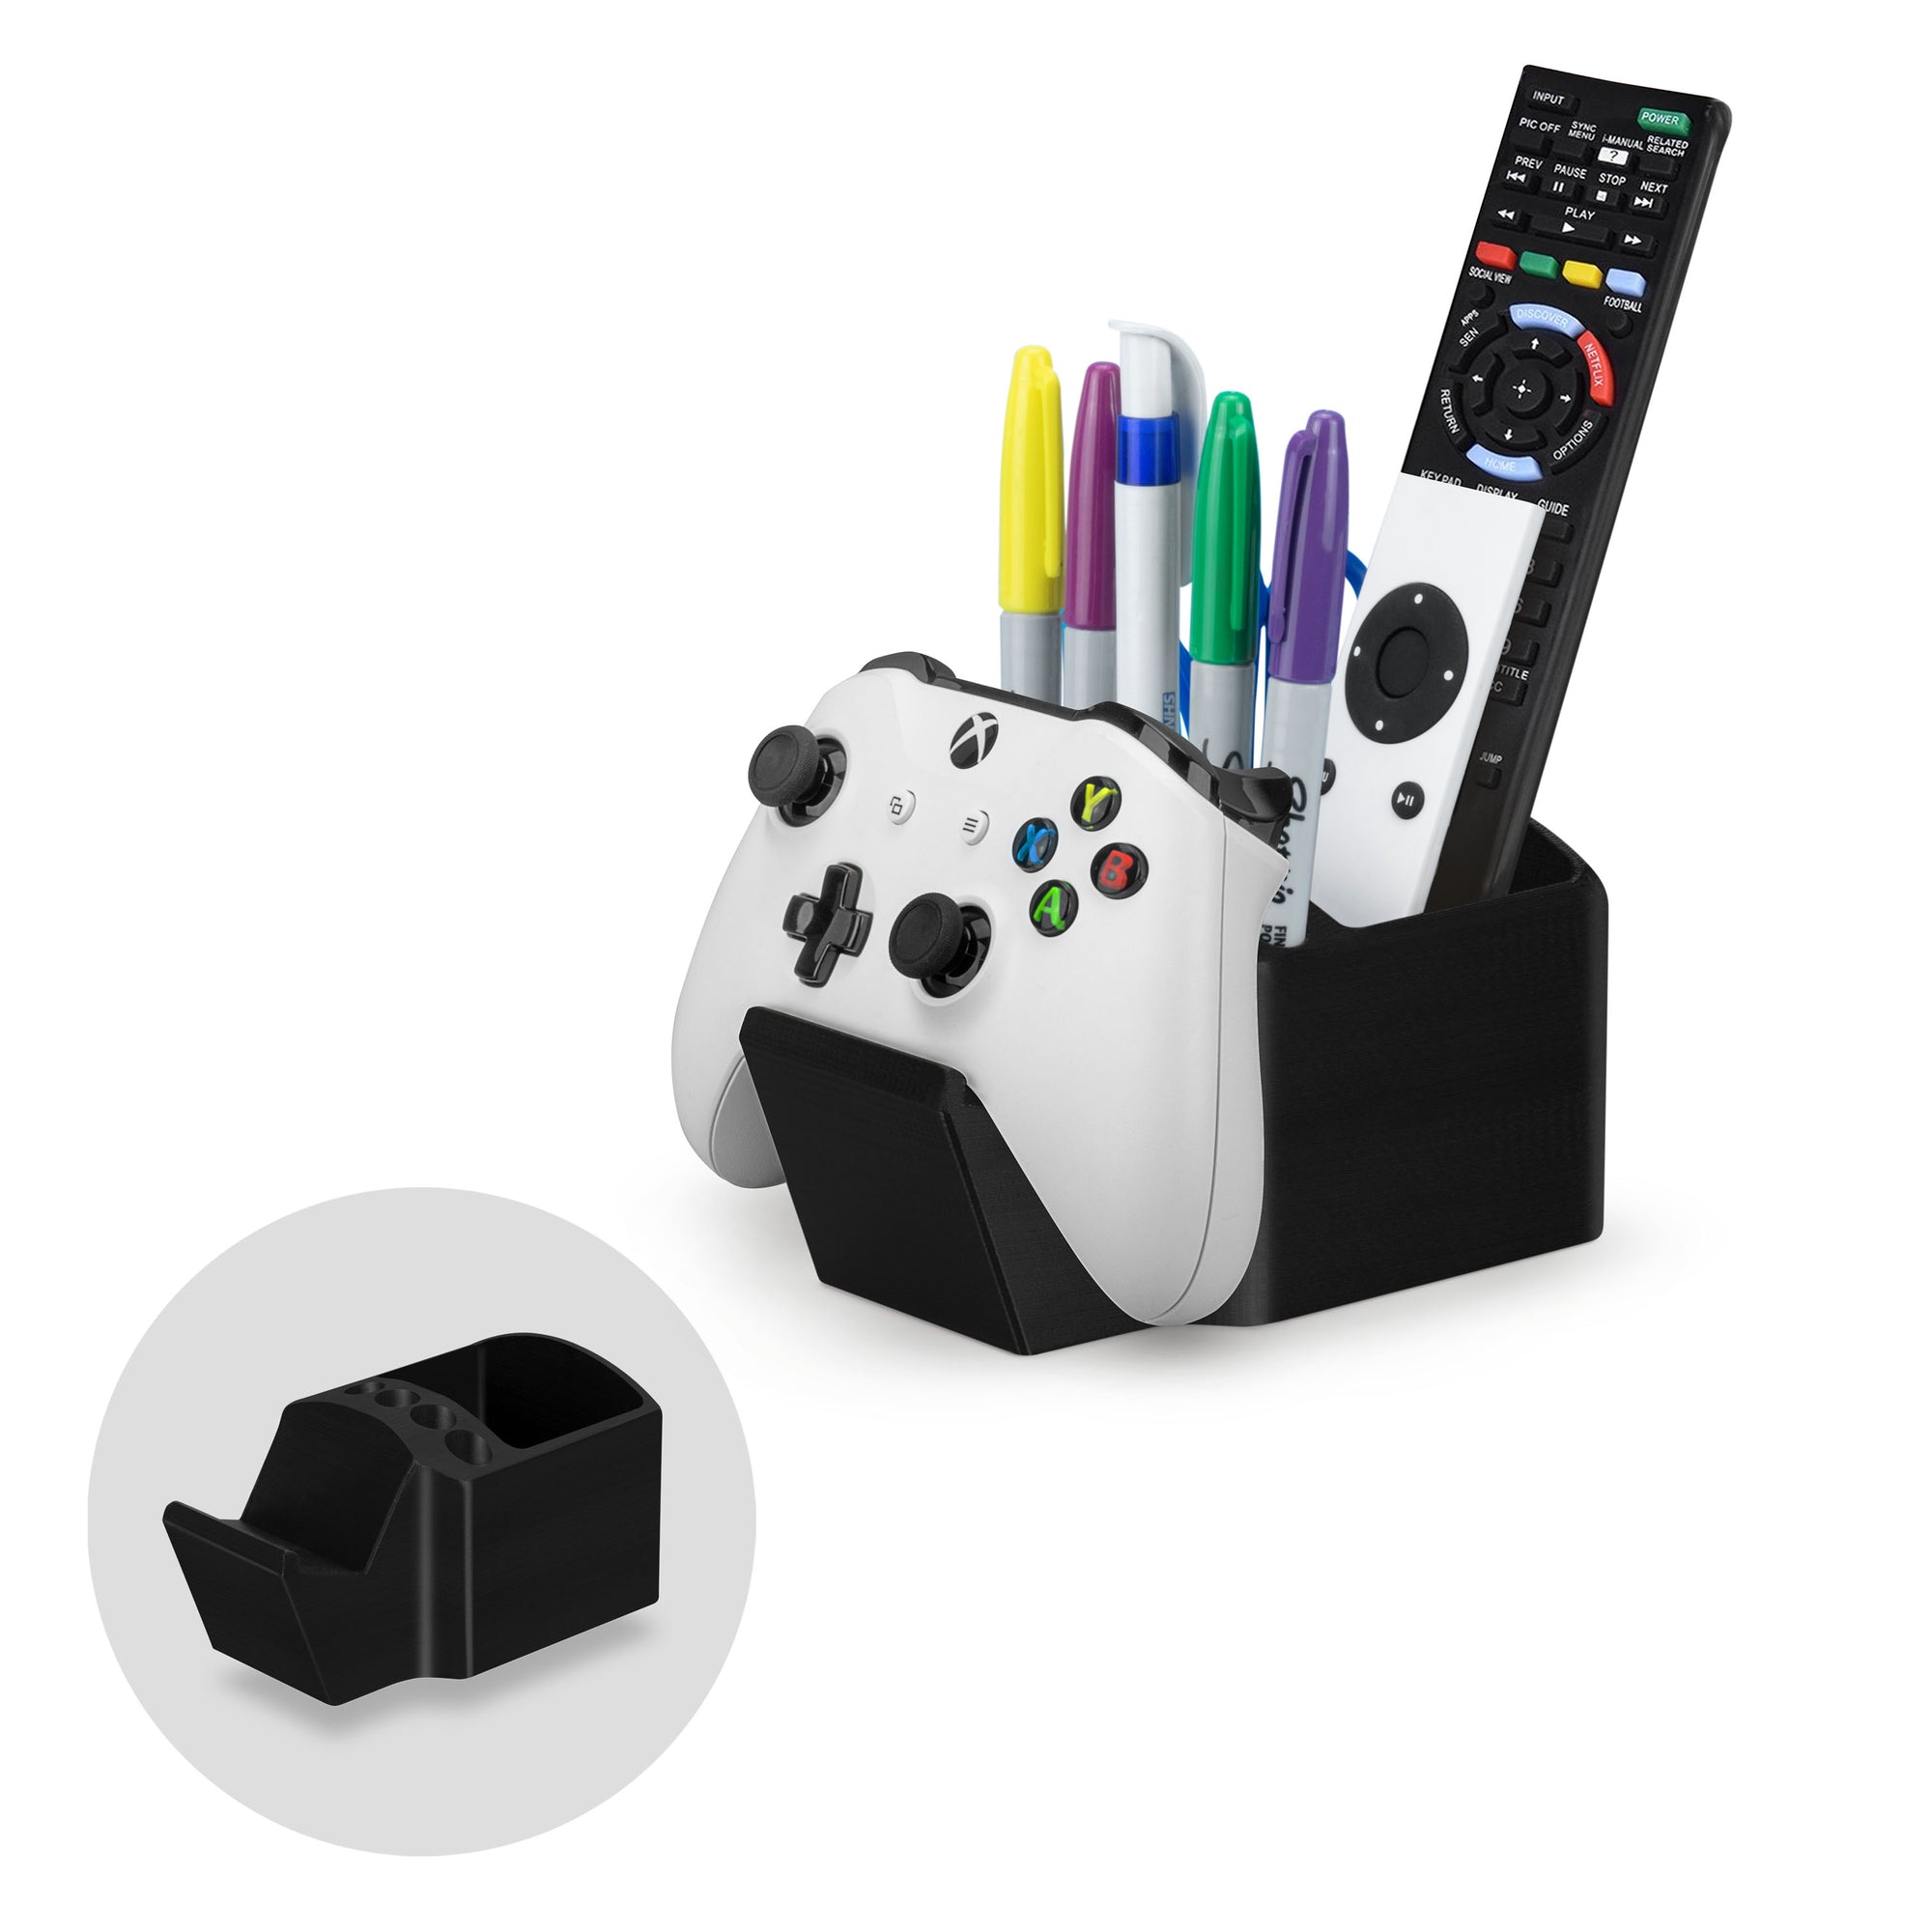 Game Controller, TV Remote Control & Pens Pencils Stationery Storage Desktop Organizer Holder, Universal Design for Xbox ONE PS5 PS4 PC Gamepads (D04)